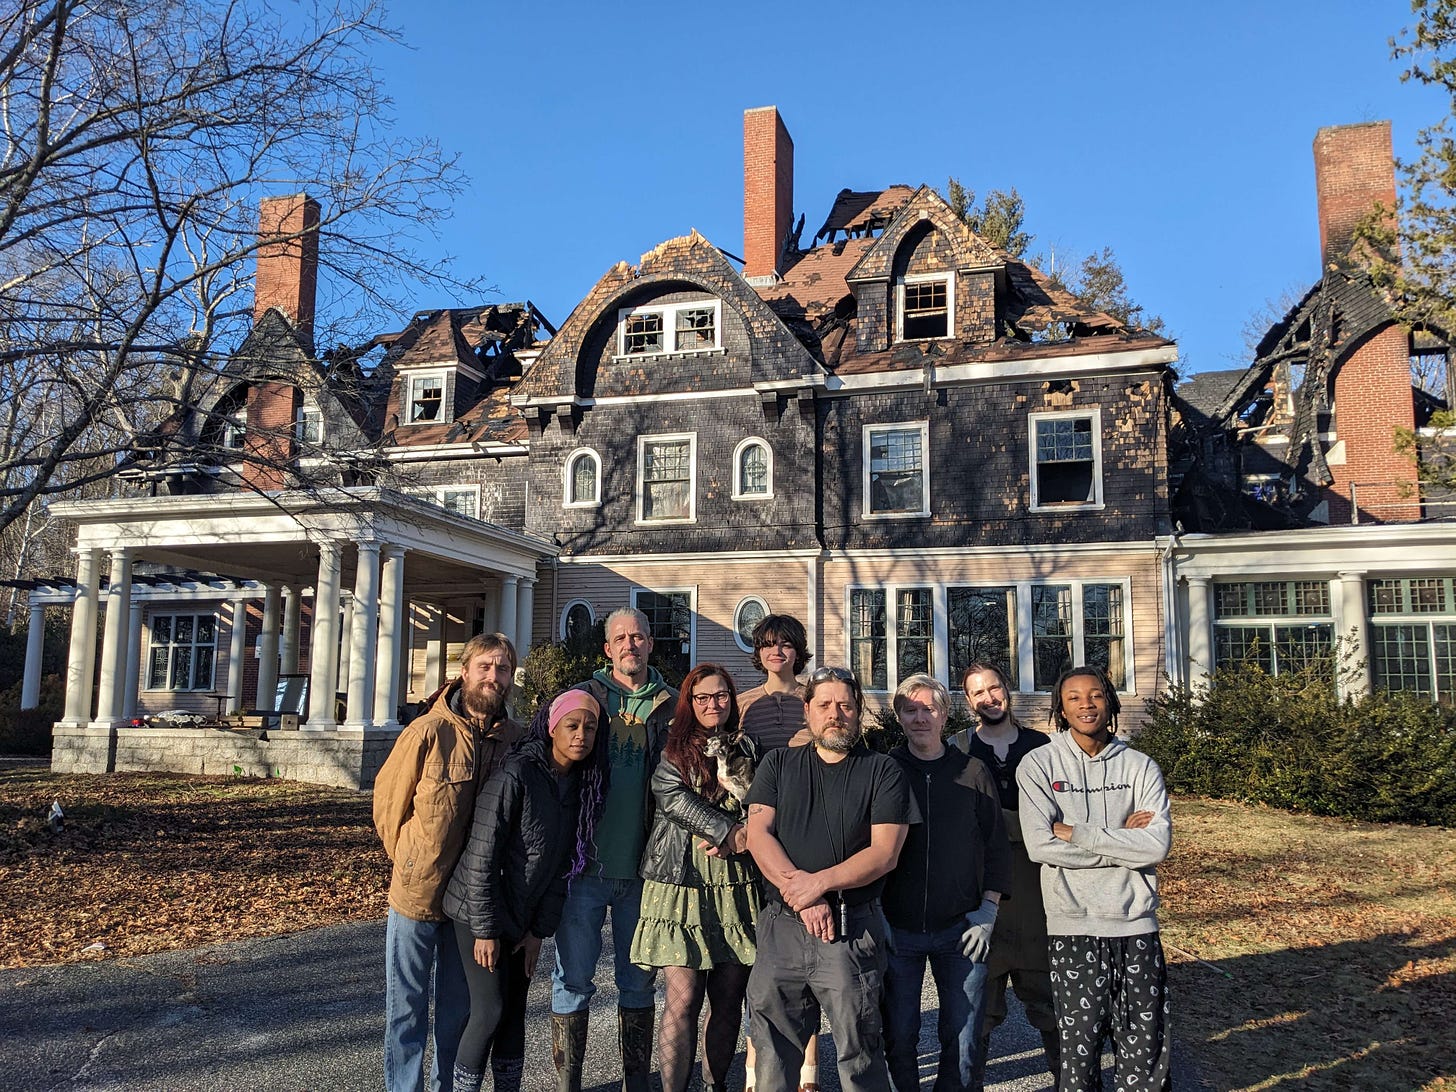 Some of the survivors from the Oakhurst Manor fire and fellow residents standing in front of the condemned manor building.